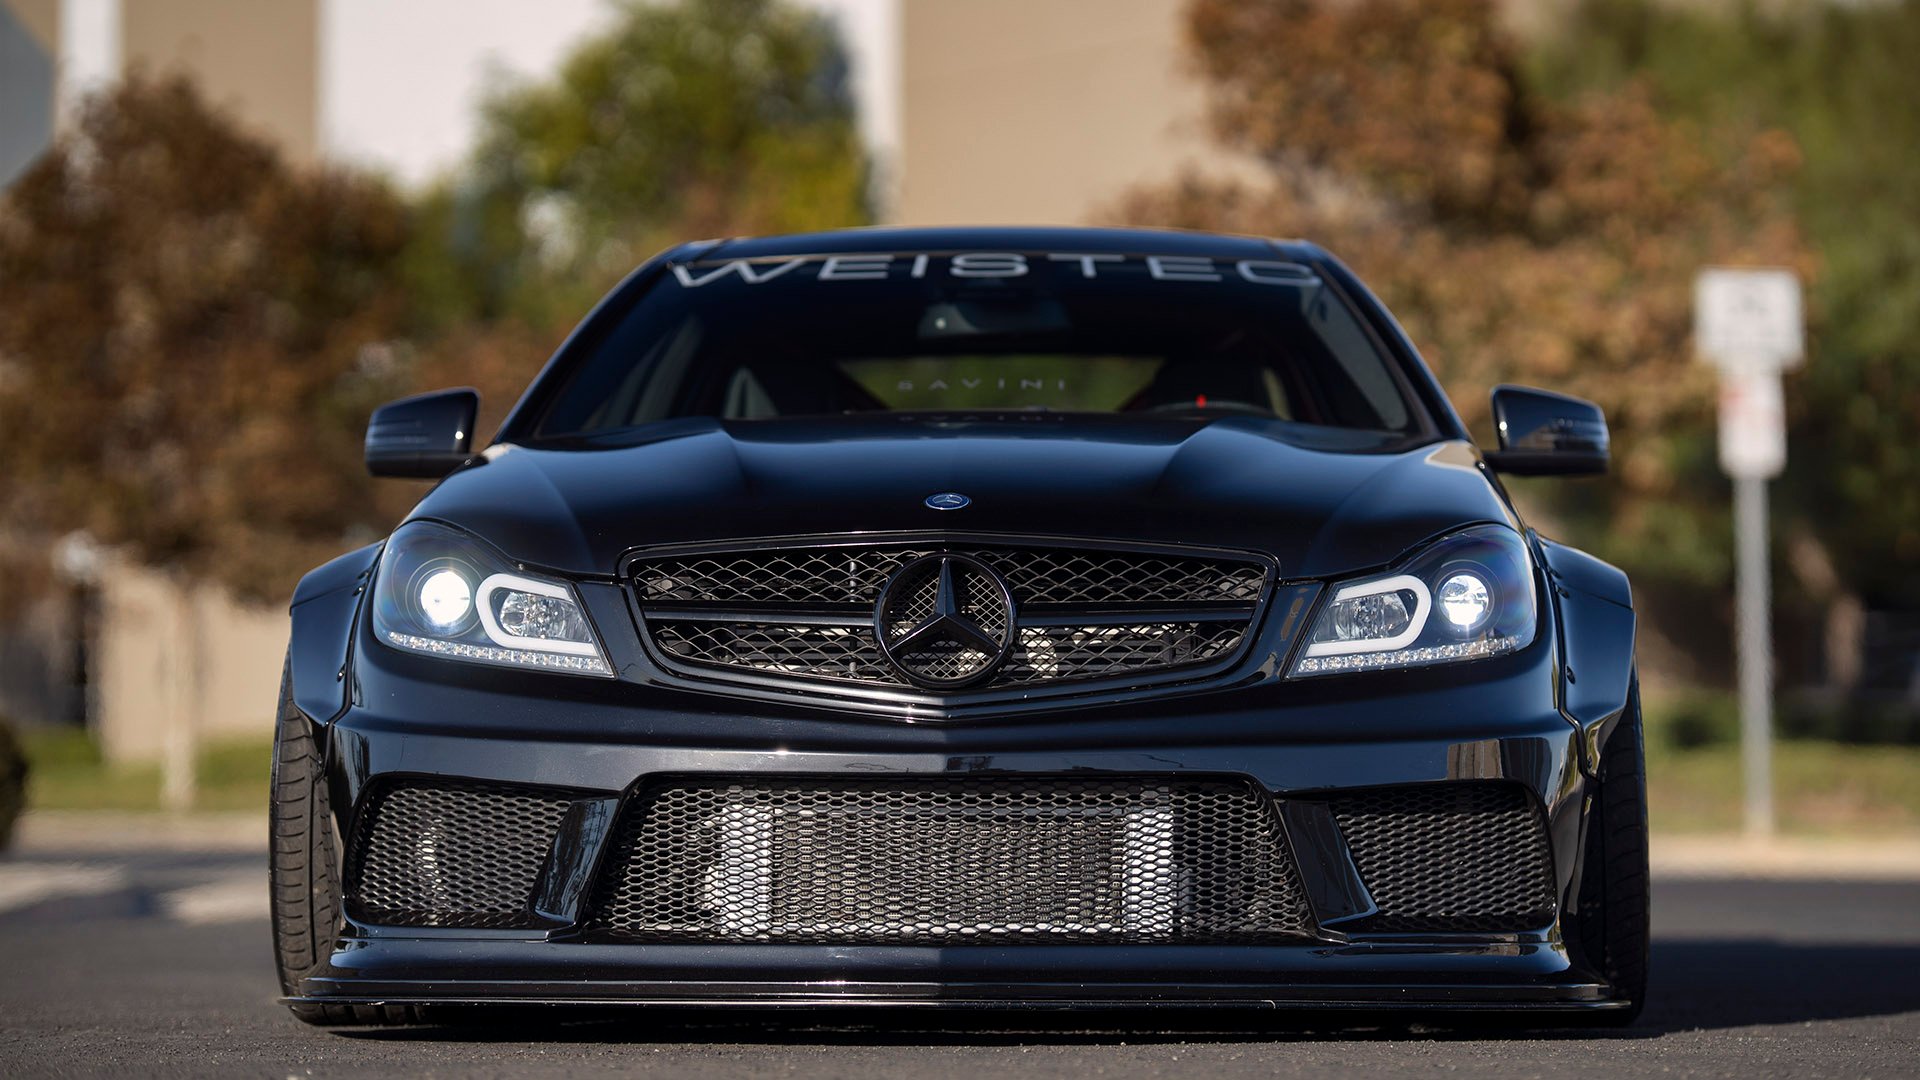 Give Me Liberty Or Give Me Death - Weistec Supercharged Mercedes-AMG C63